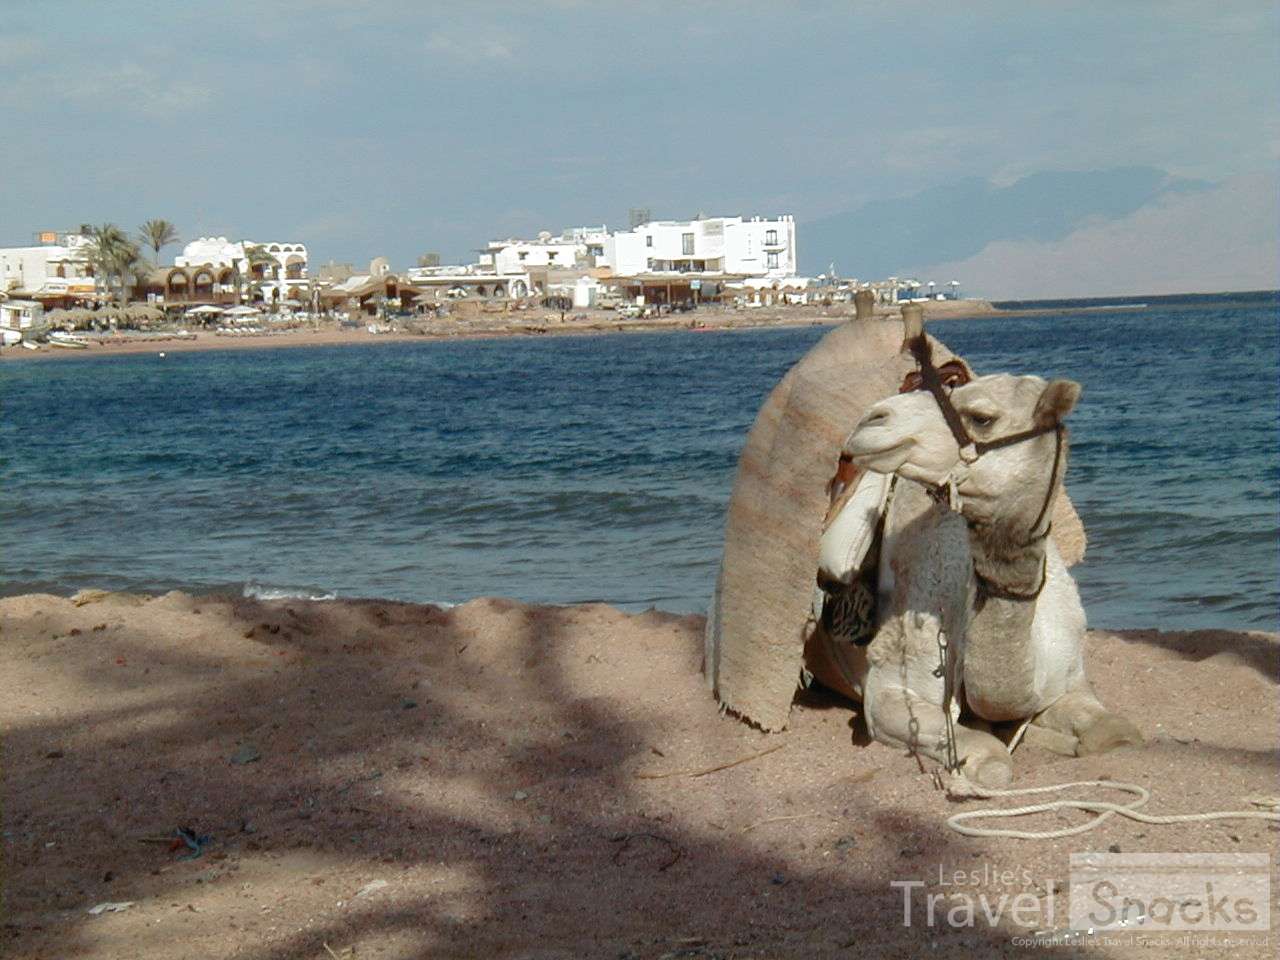 Of course there's a camel on the beach at Dahab.